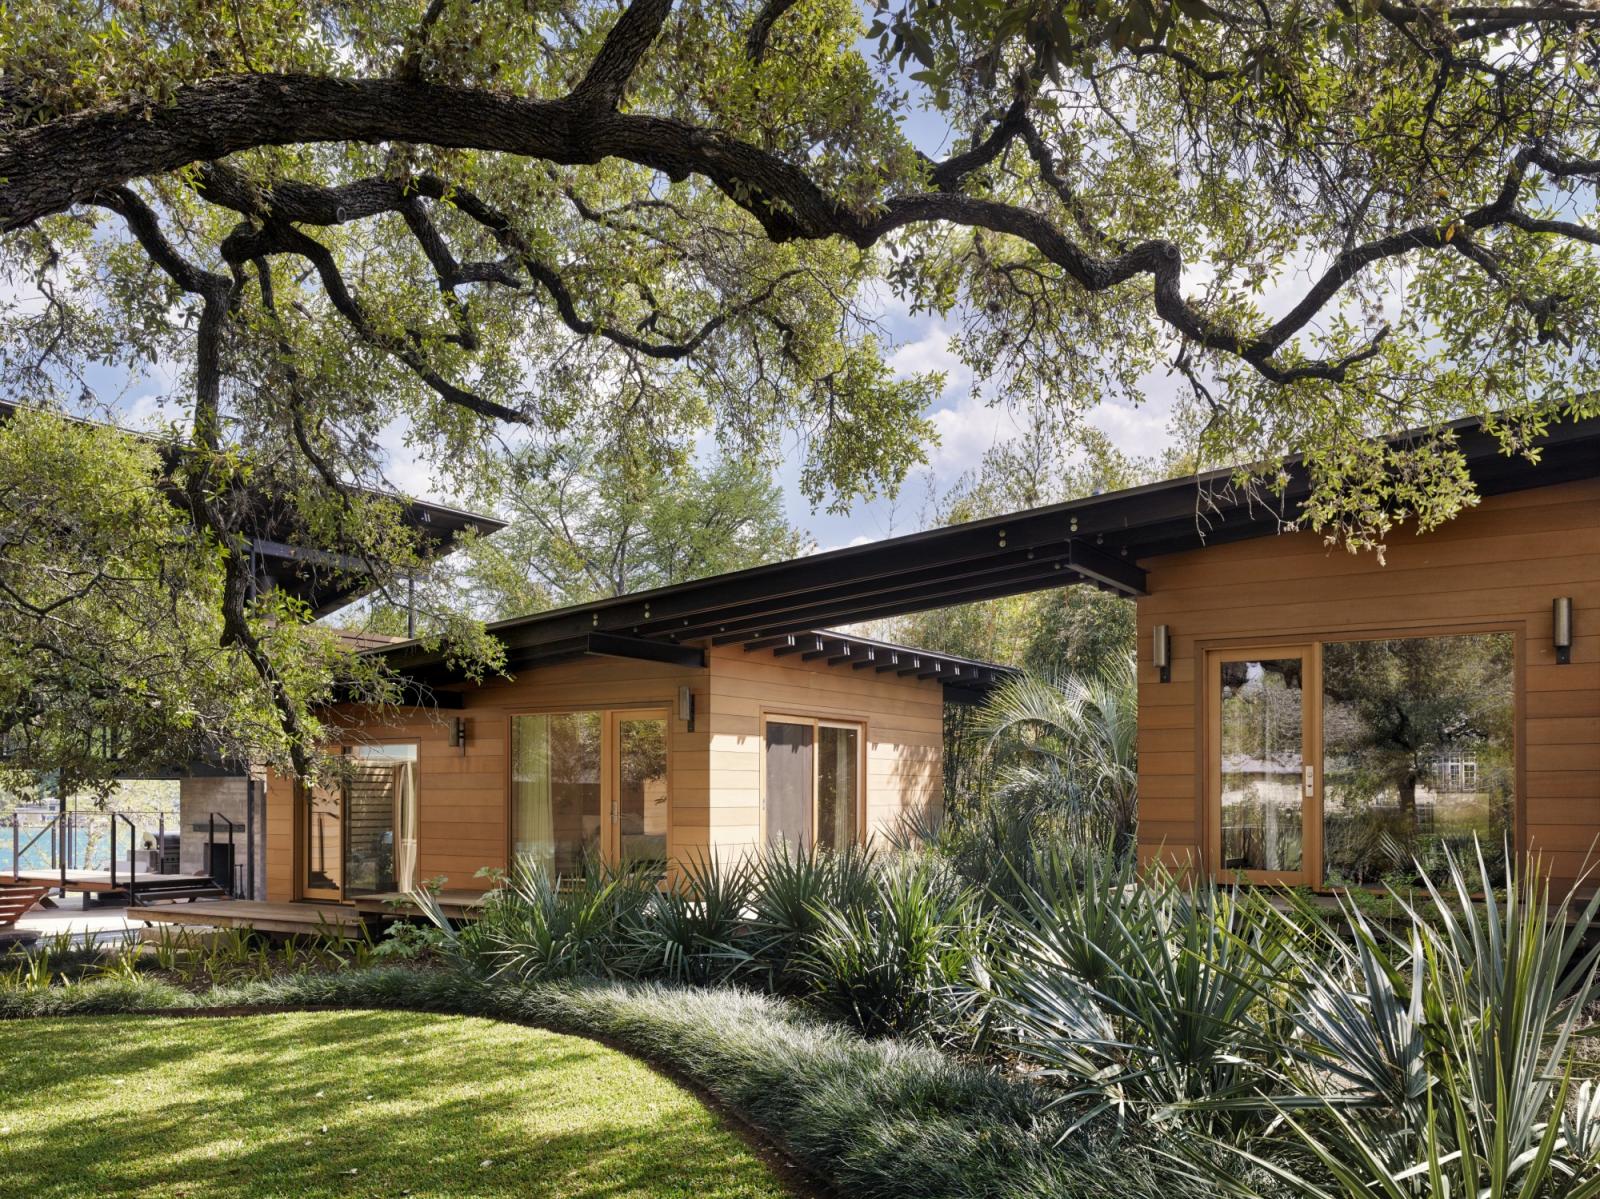 Towering heritage oak trees shade the front lawn and separate  guest quarters